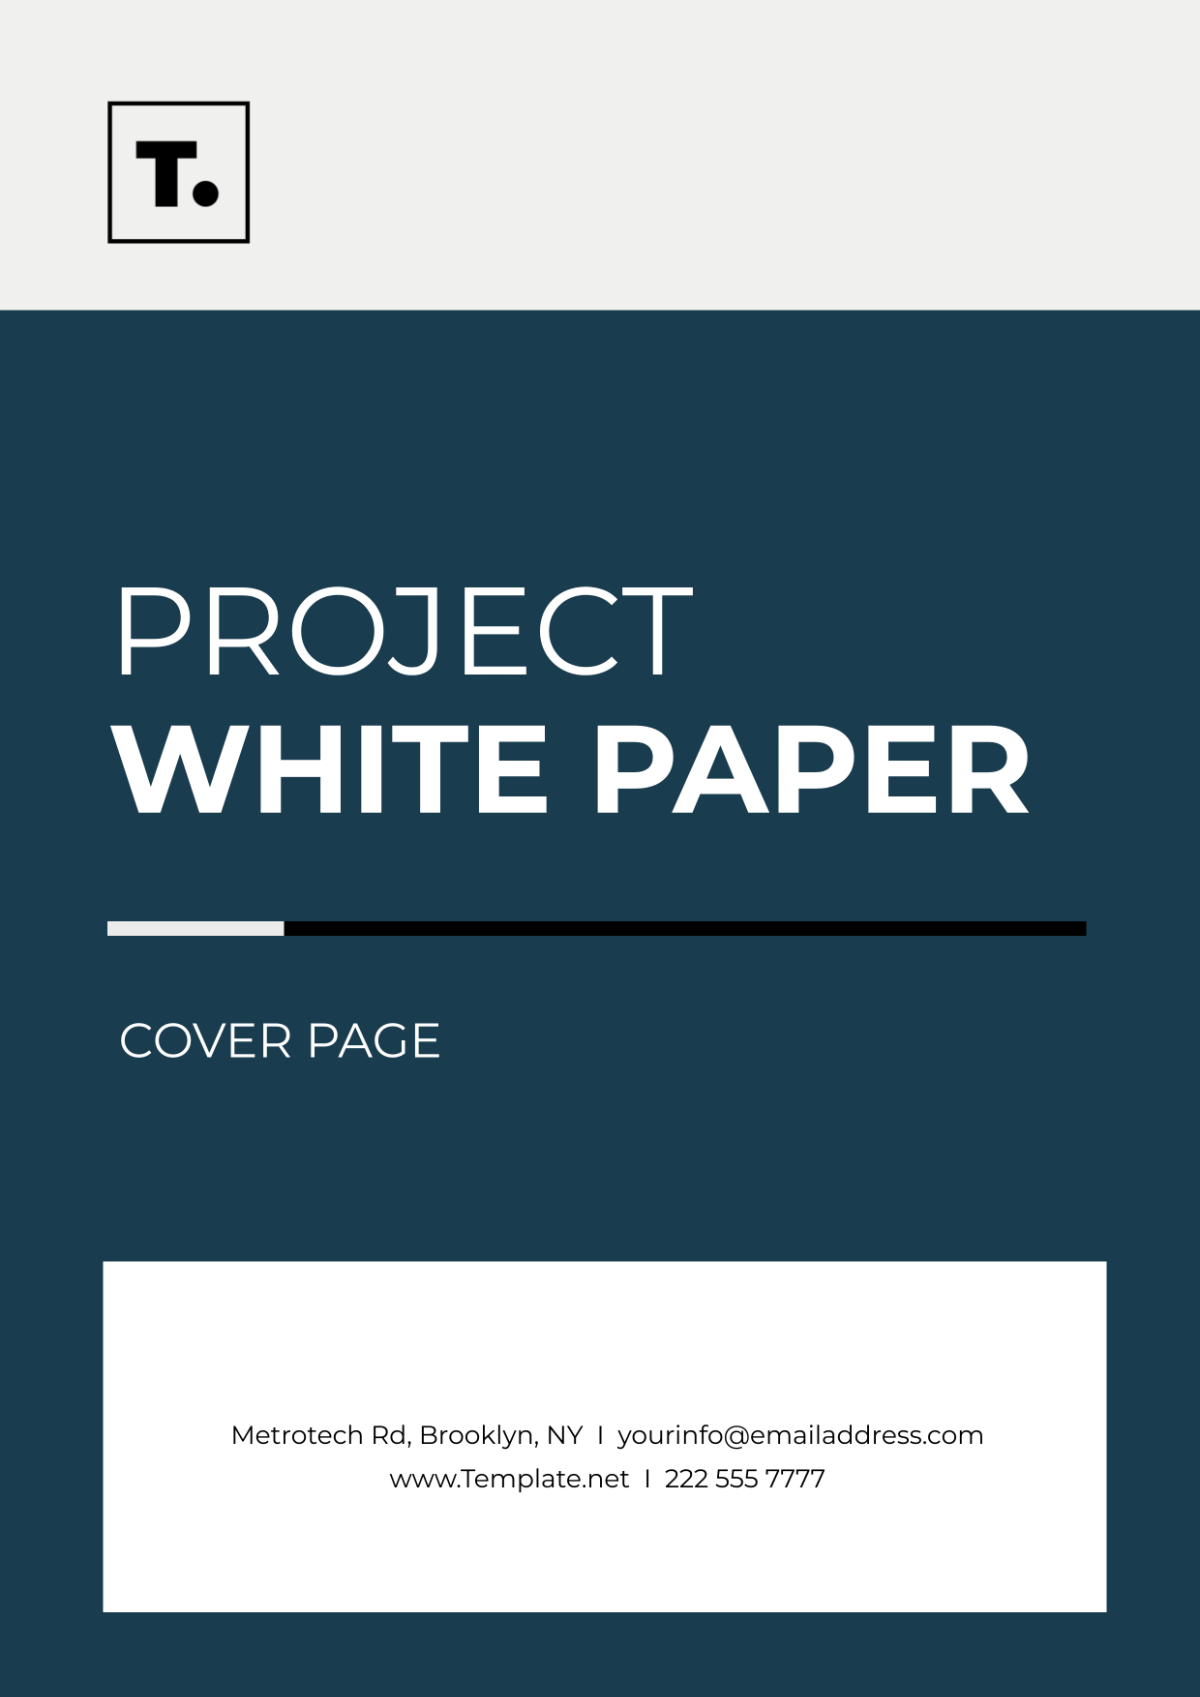 Project White Paper Cover Page